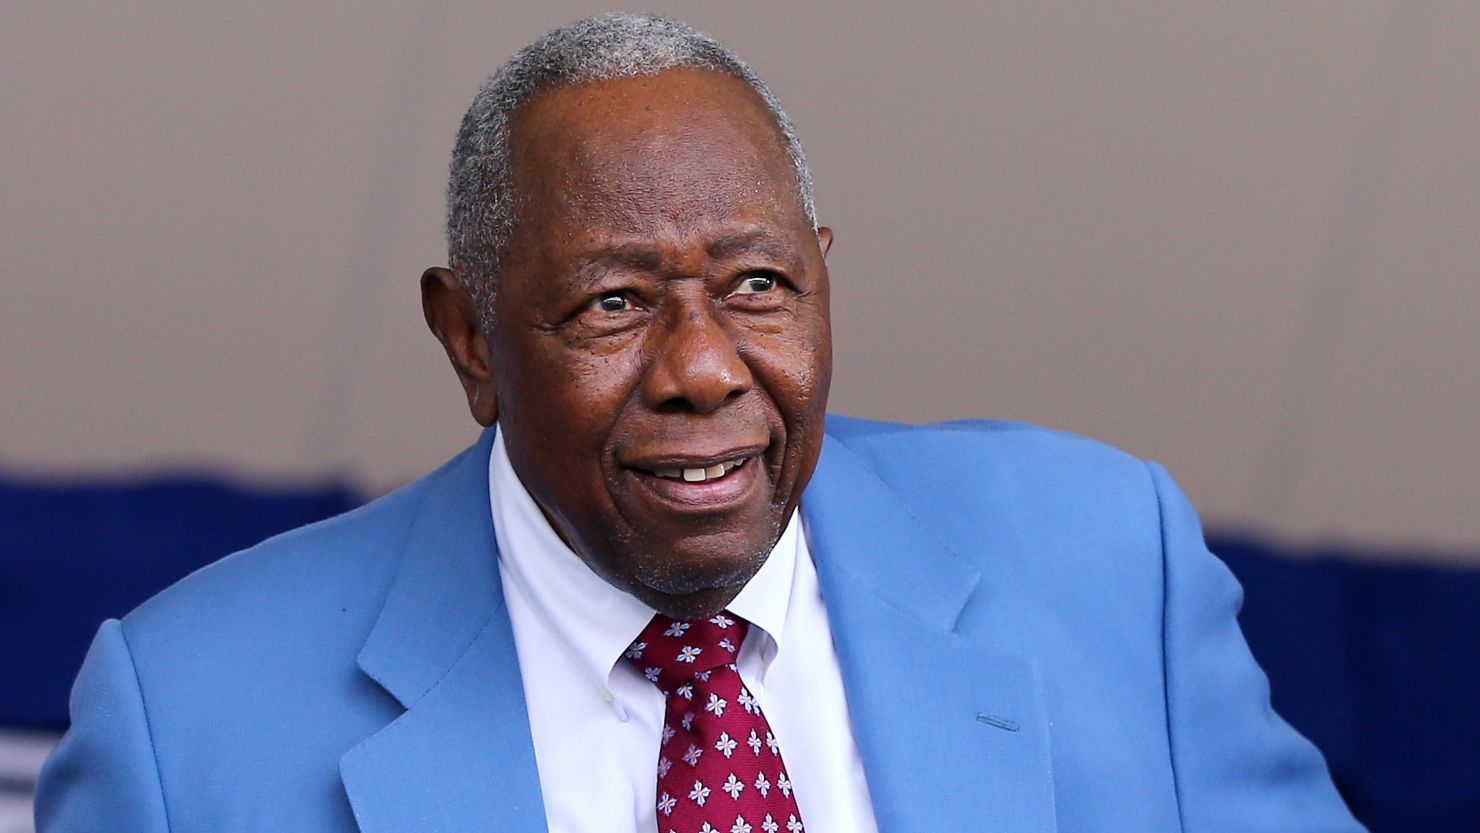 Hank Aaron, pictured here at the Hall of Fame Induction Ceremony at National Baseball Hall of Fame in 2015, died in January of 2021.